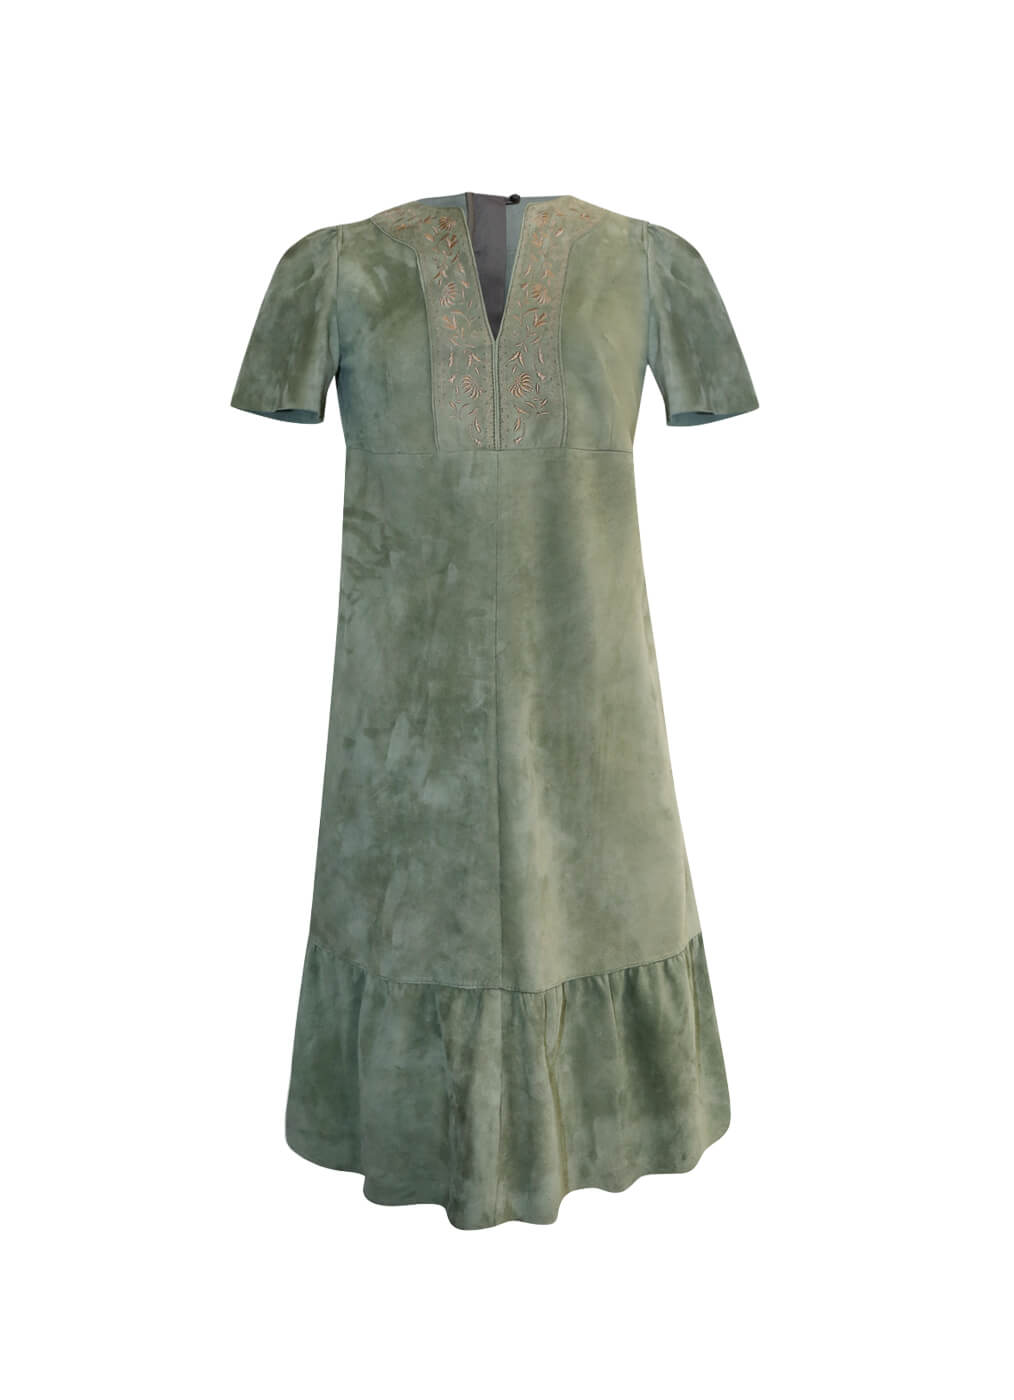 Goat Leather Dress “Marrakech”, agave